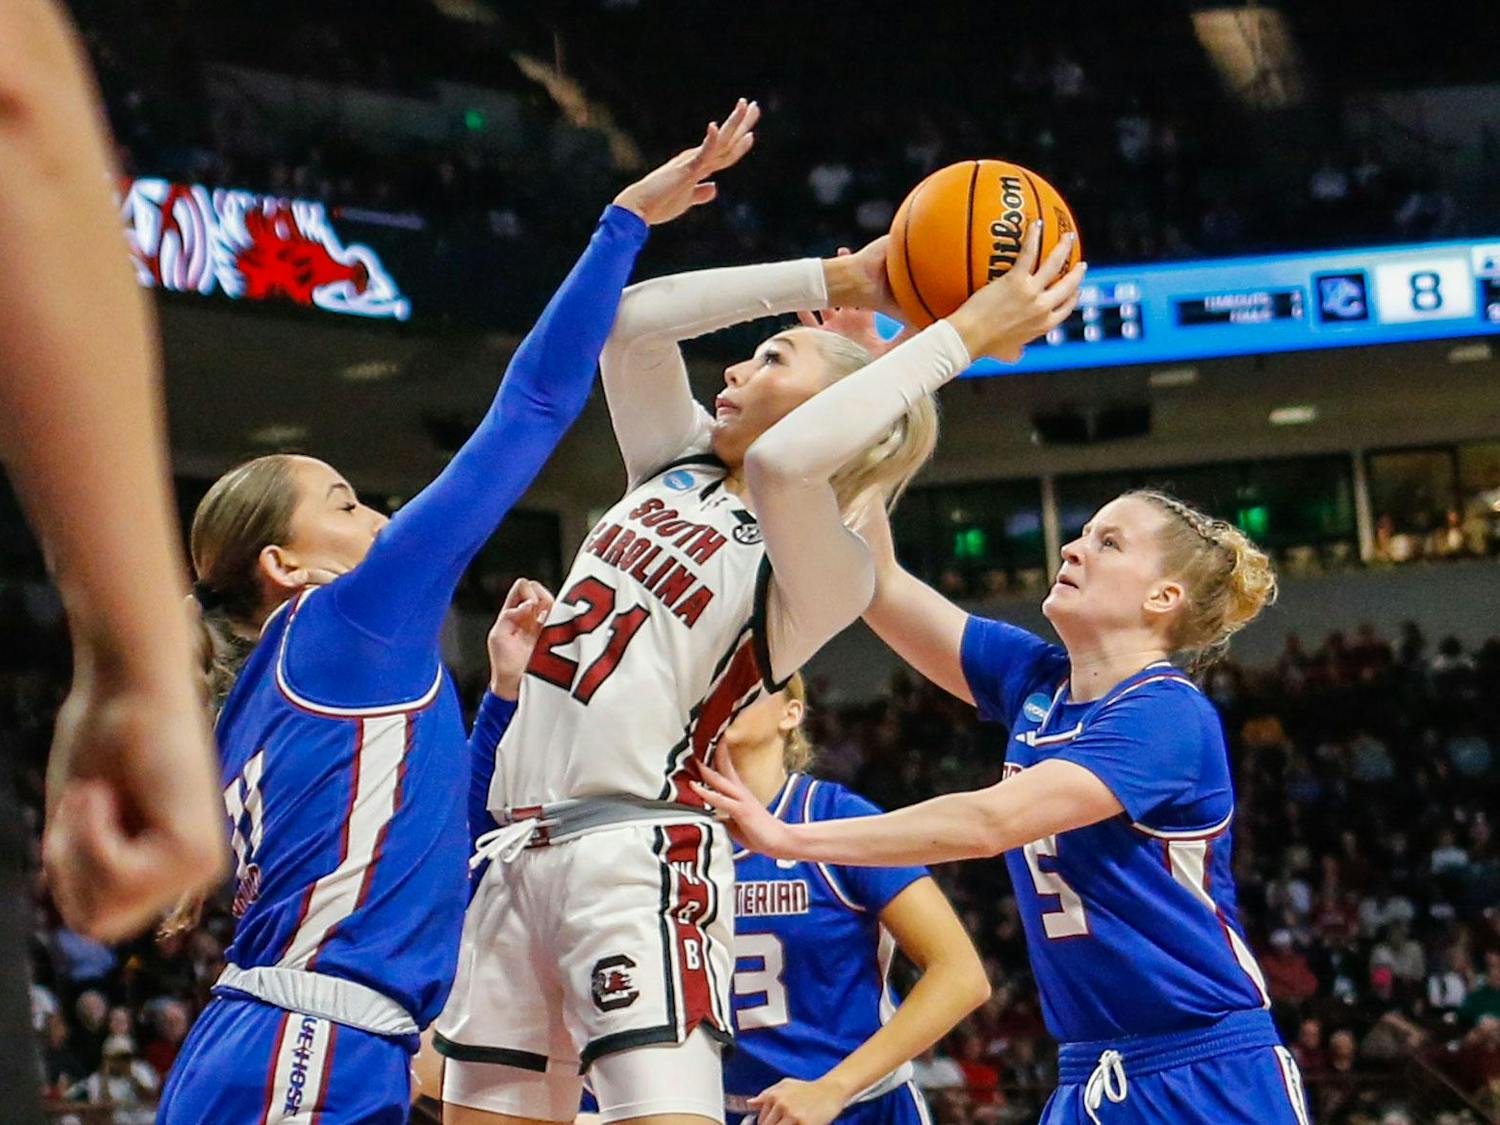 Sophomore forward Chloe Kitts goes up for a shot during South Carolina’s game against Presbyterian in round one of the 2024 NCAA Women’s Tournament on March 22, 2024, at Colonial Life Arena. Kitts led the team in scoring with 21 points in the Gamecocks’ 91-39 victory over the Blue Hose.